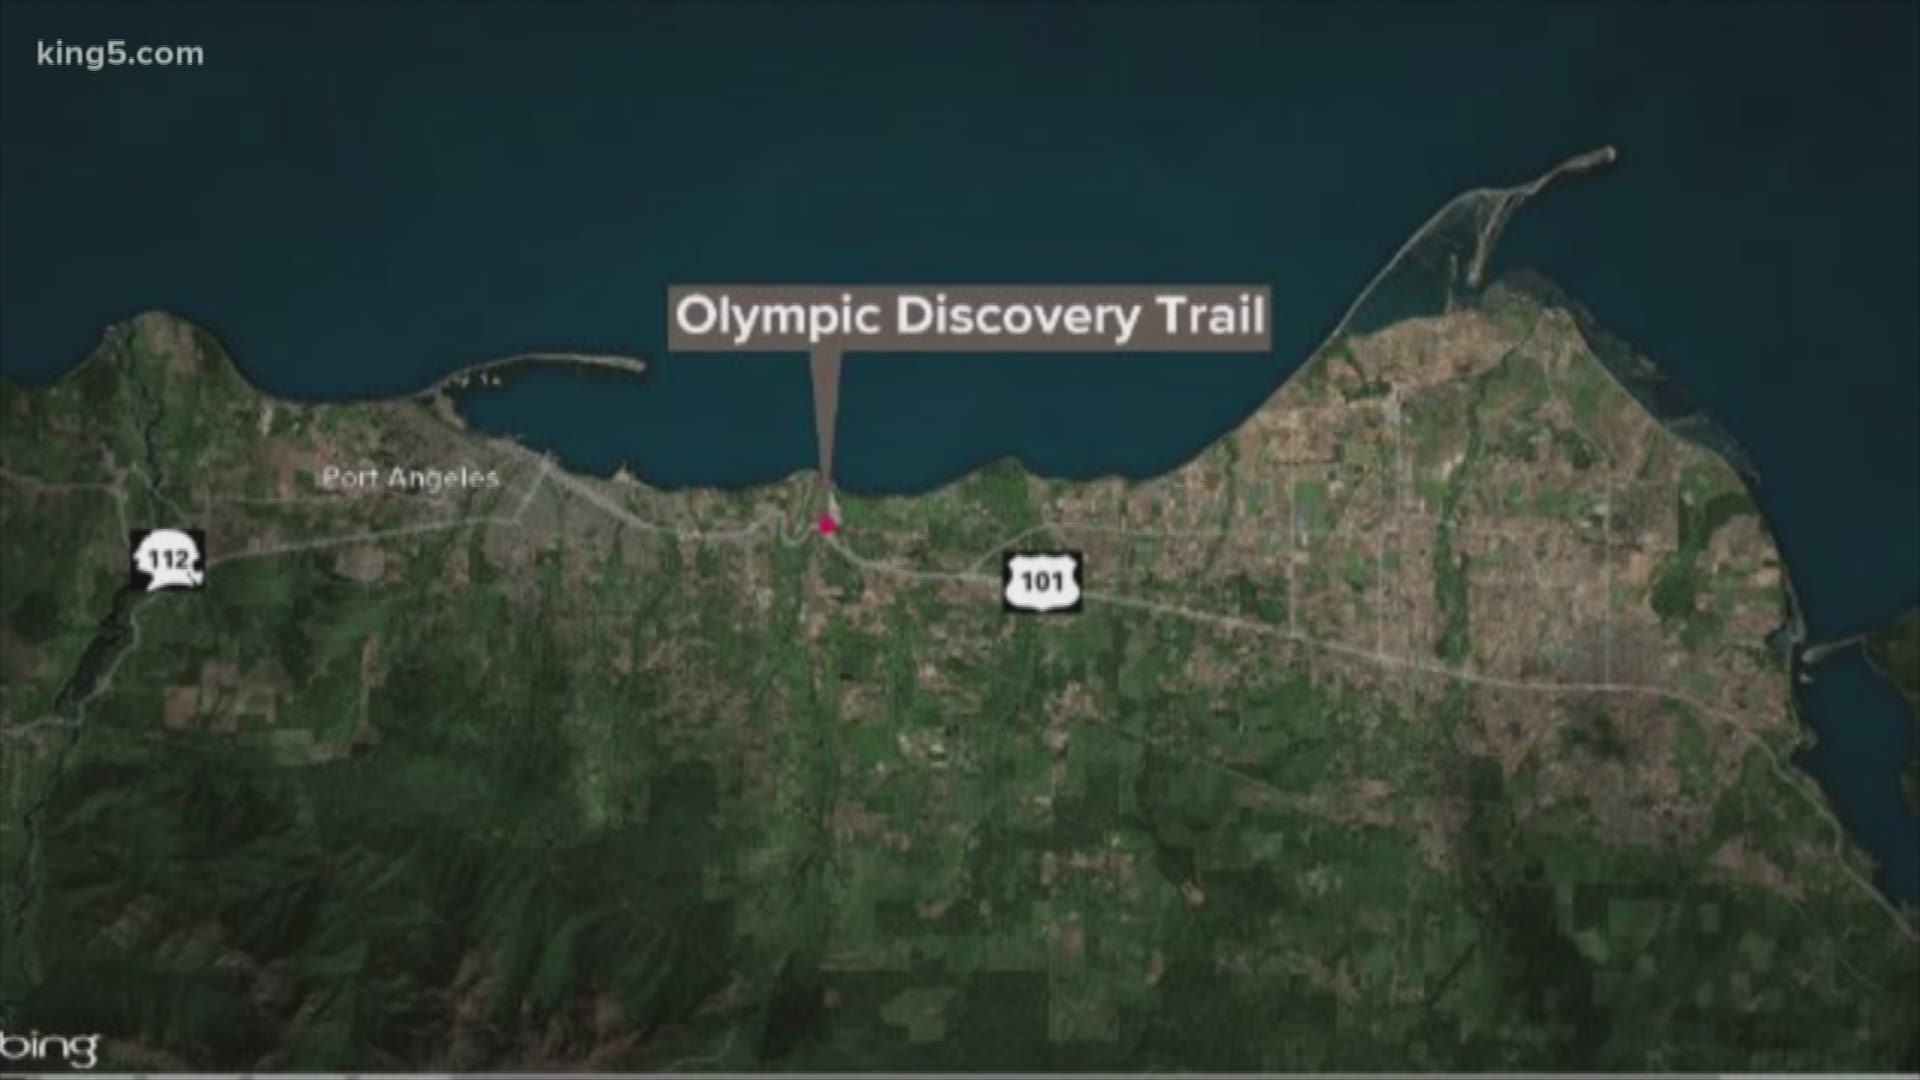 Human remains believed to be between 500 and 1,000 years old were discovered on the Olympic Discovery Trail near Port Angeles.